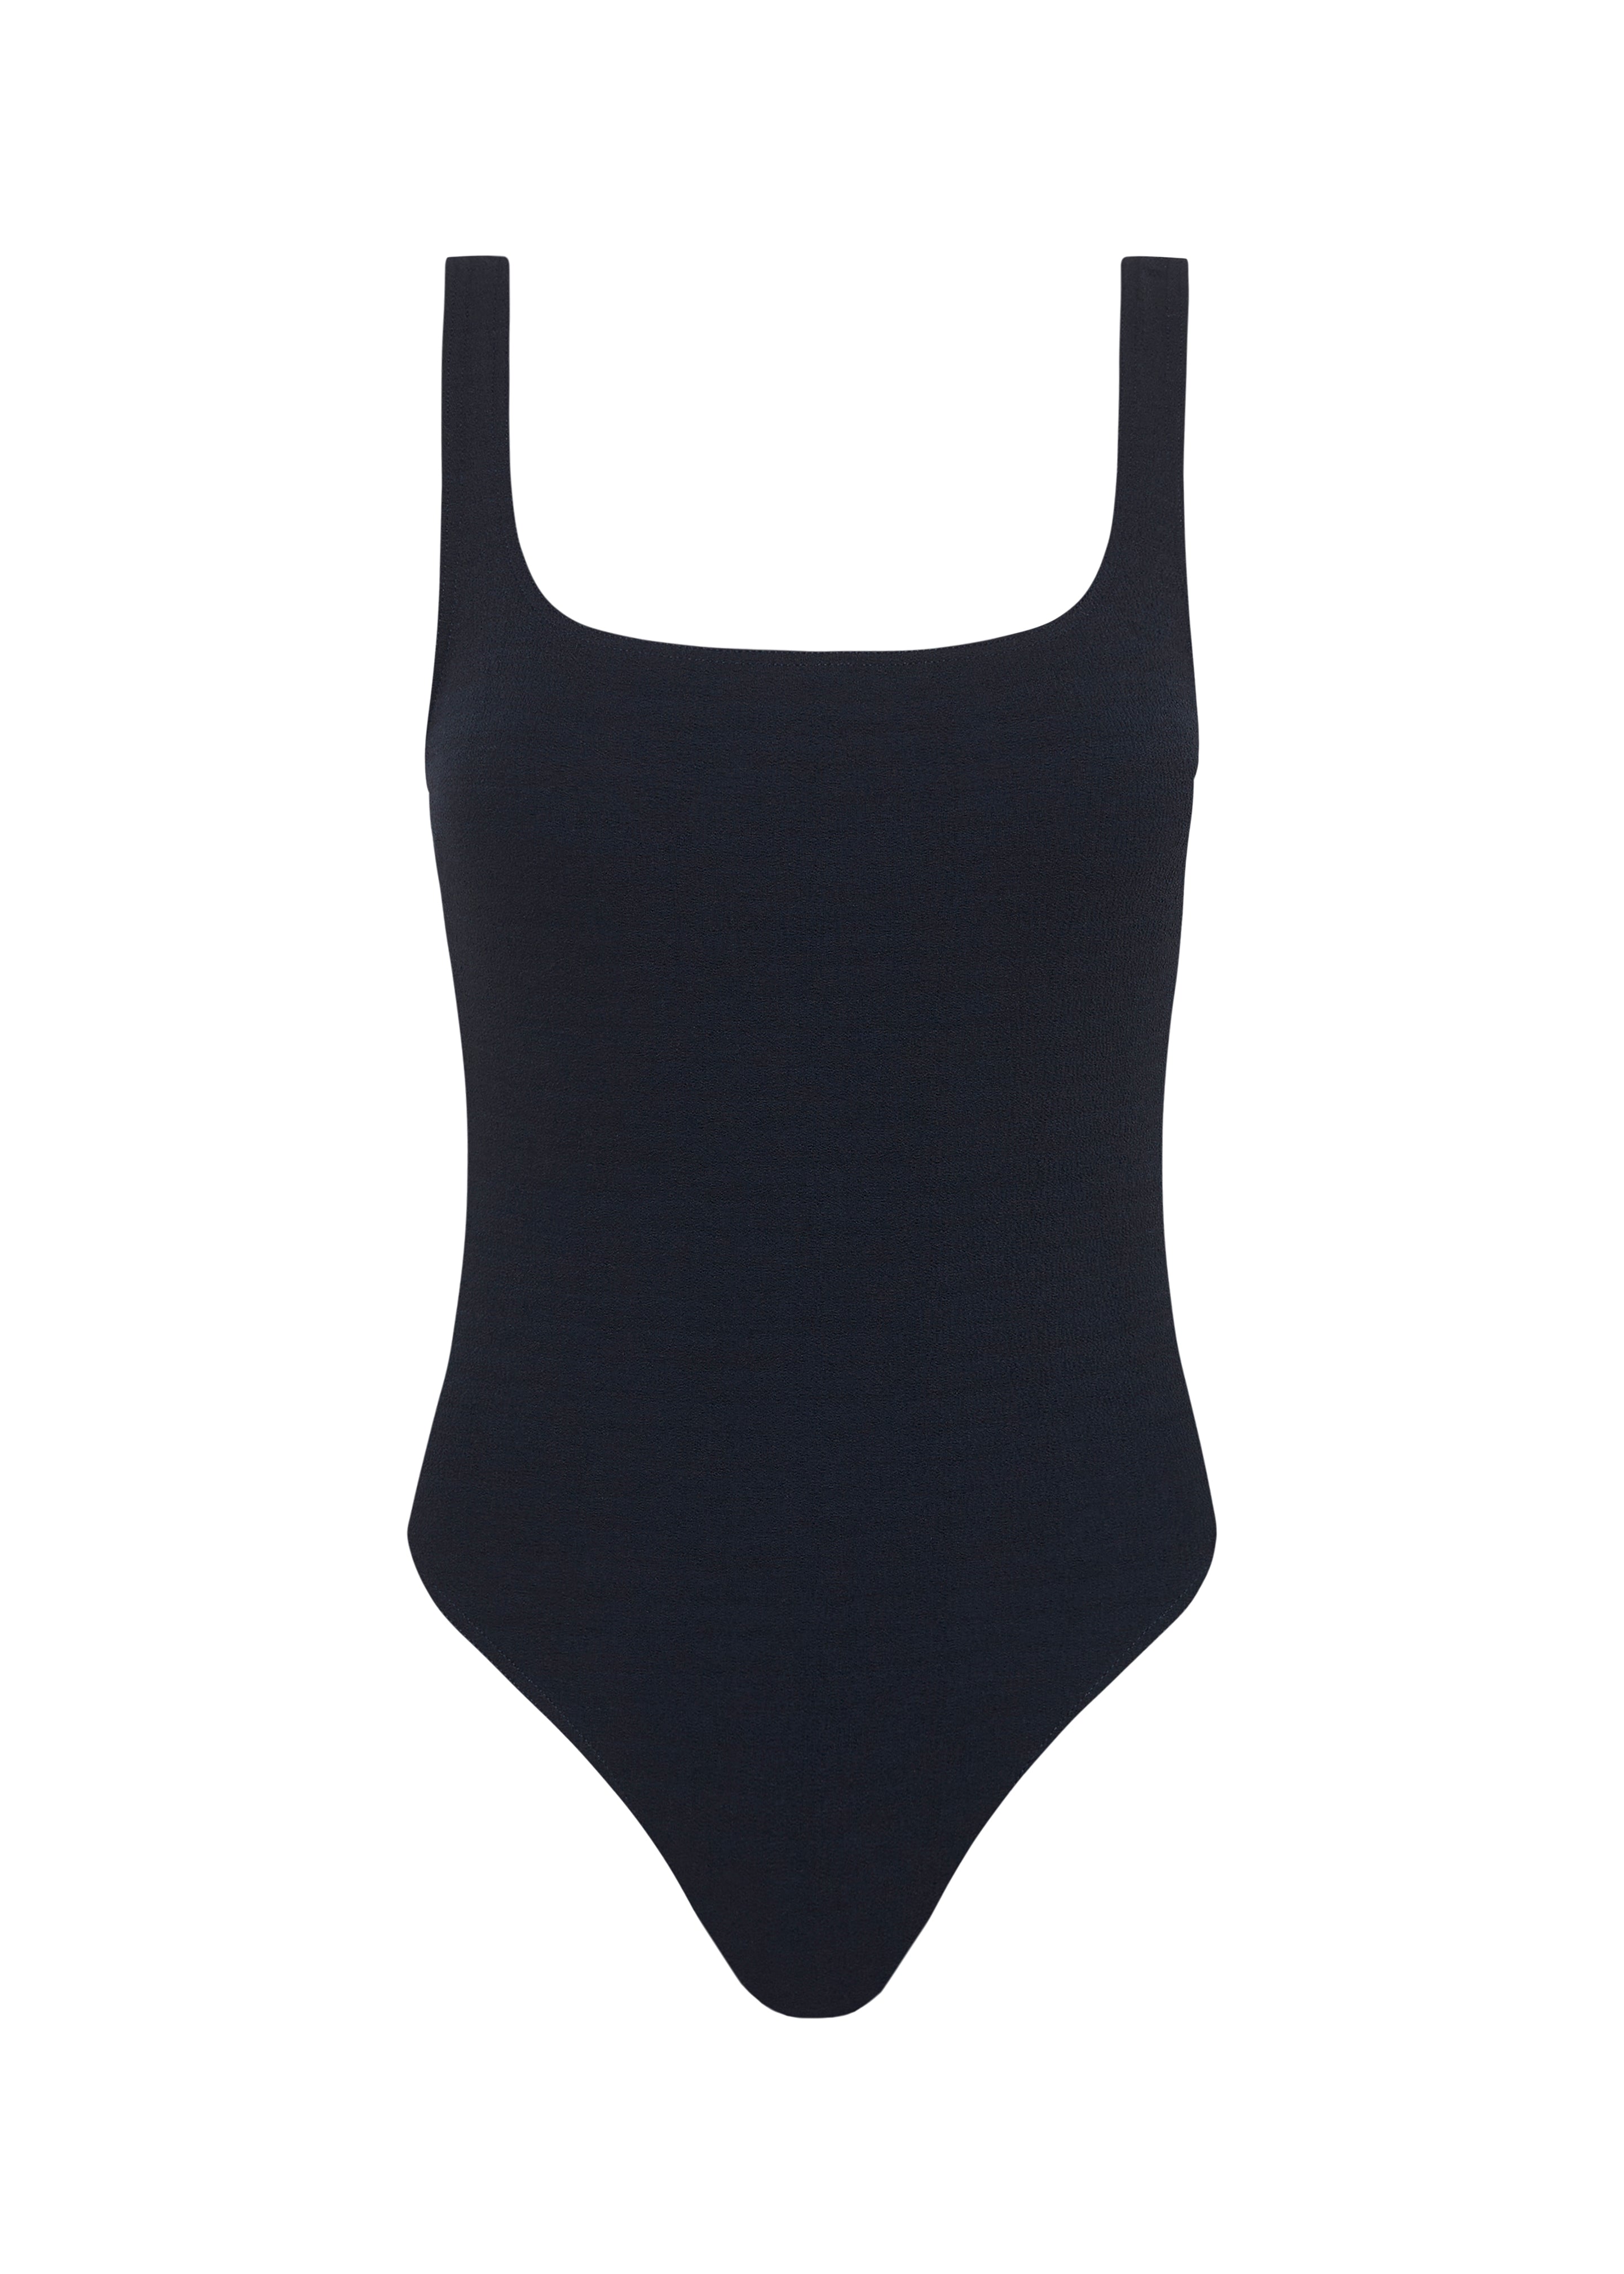 Matteau Nineties Maillot Swimsuit - Navy Crinkle - 5